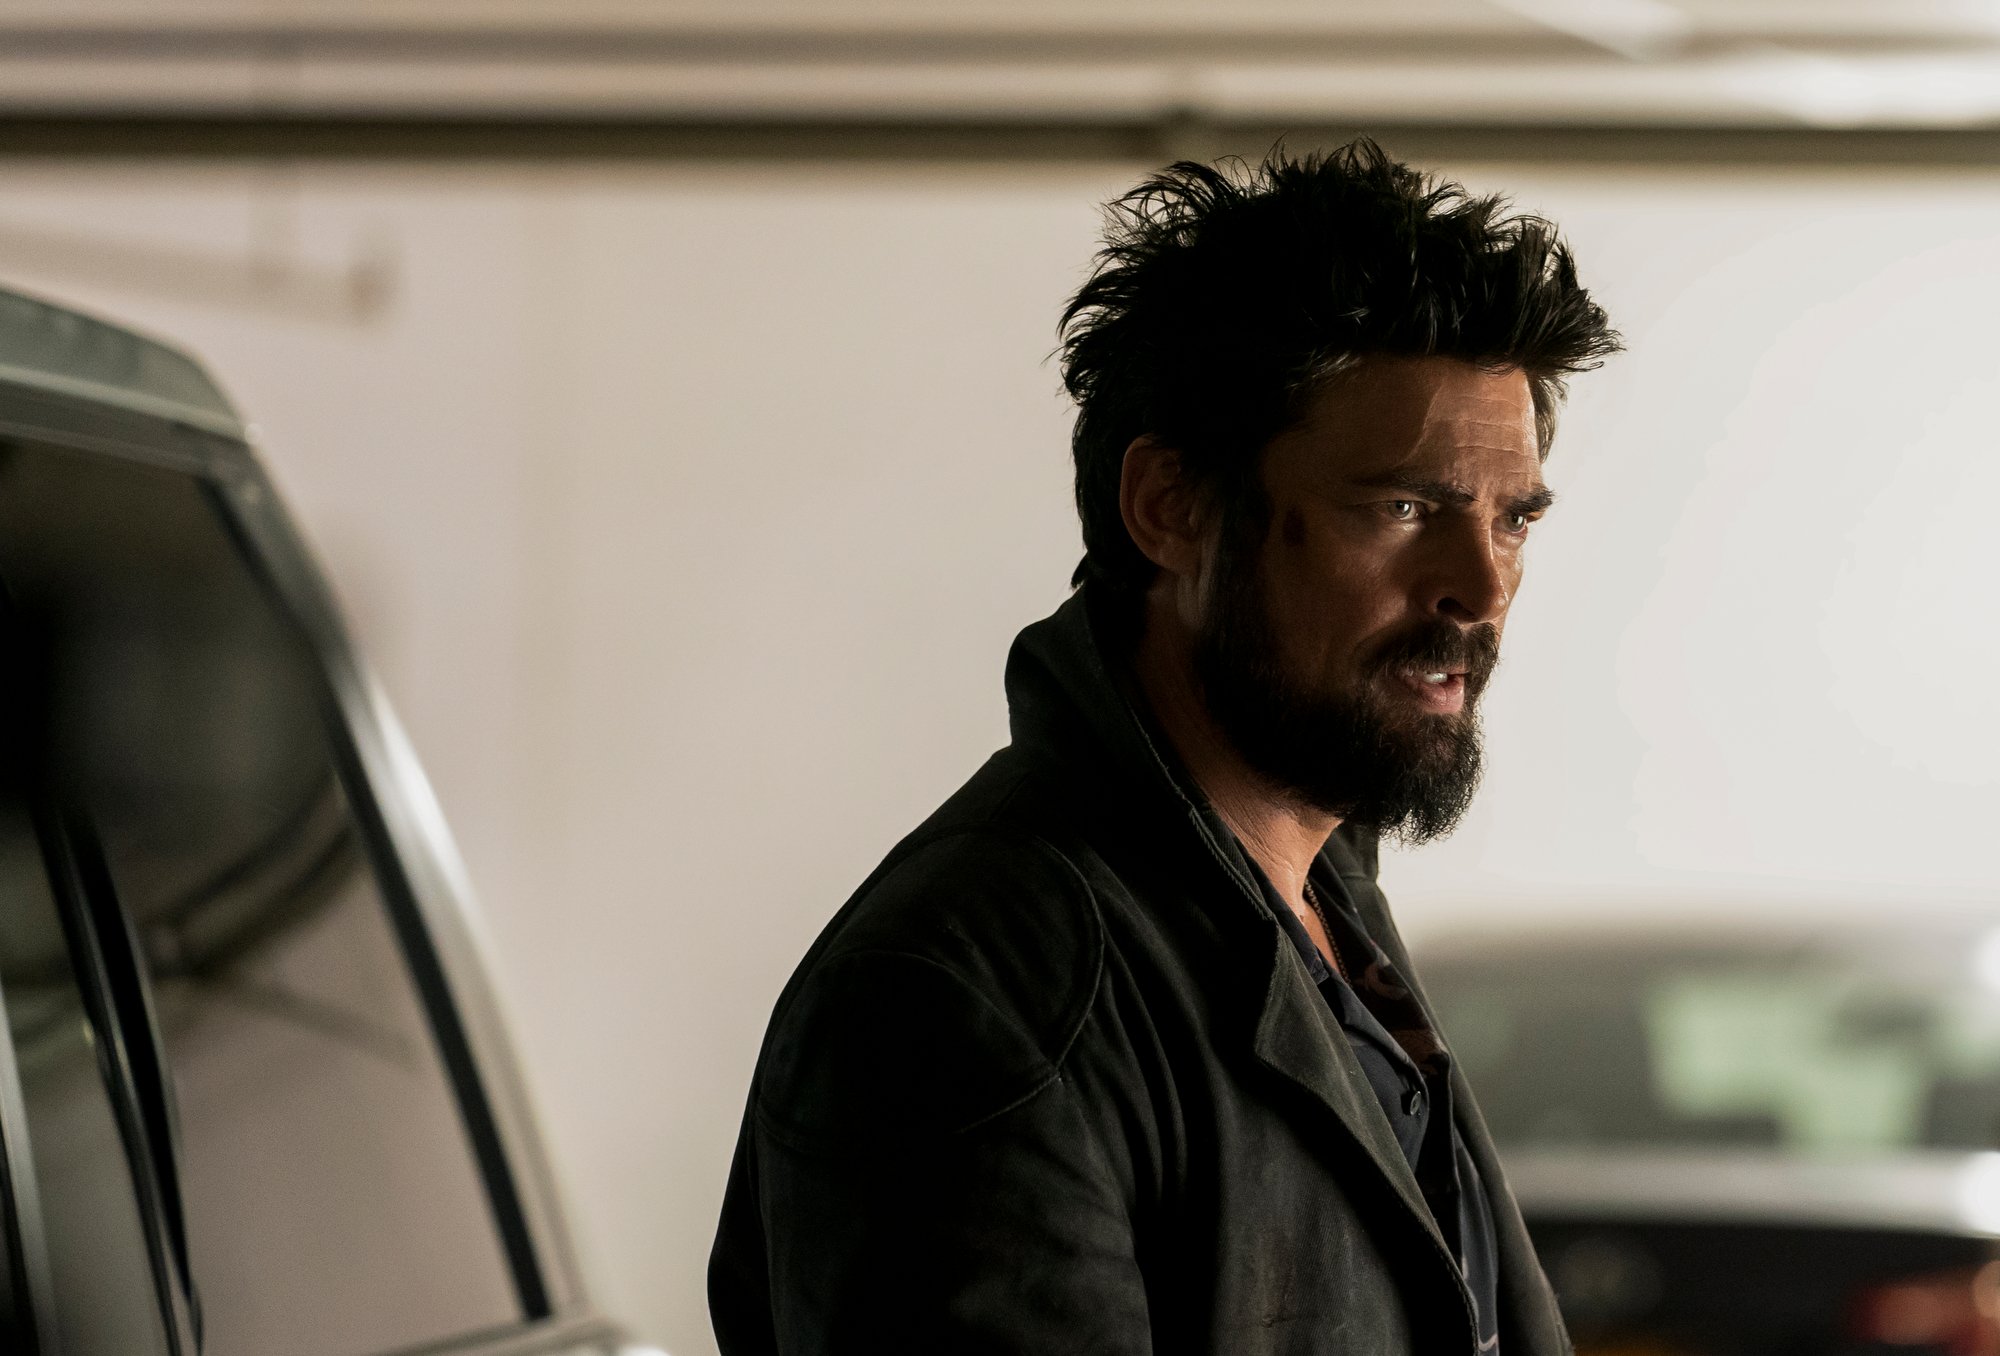 Karl Urban as Billy Butcher in 'The Boys,' which will present its characters with 1 major question in season 3. He's wearing a black coat and looks angry.